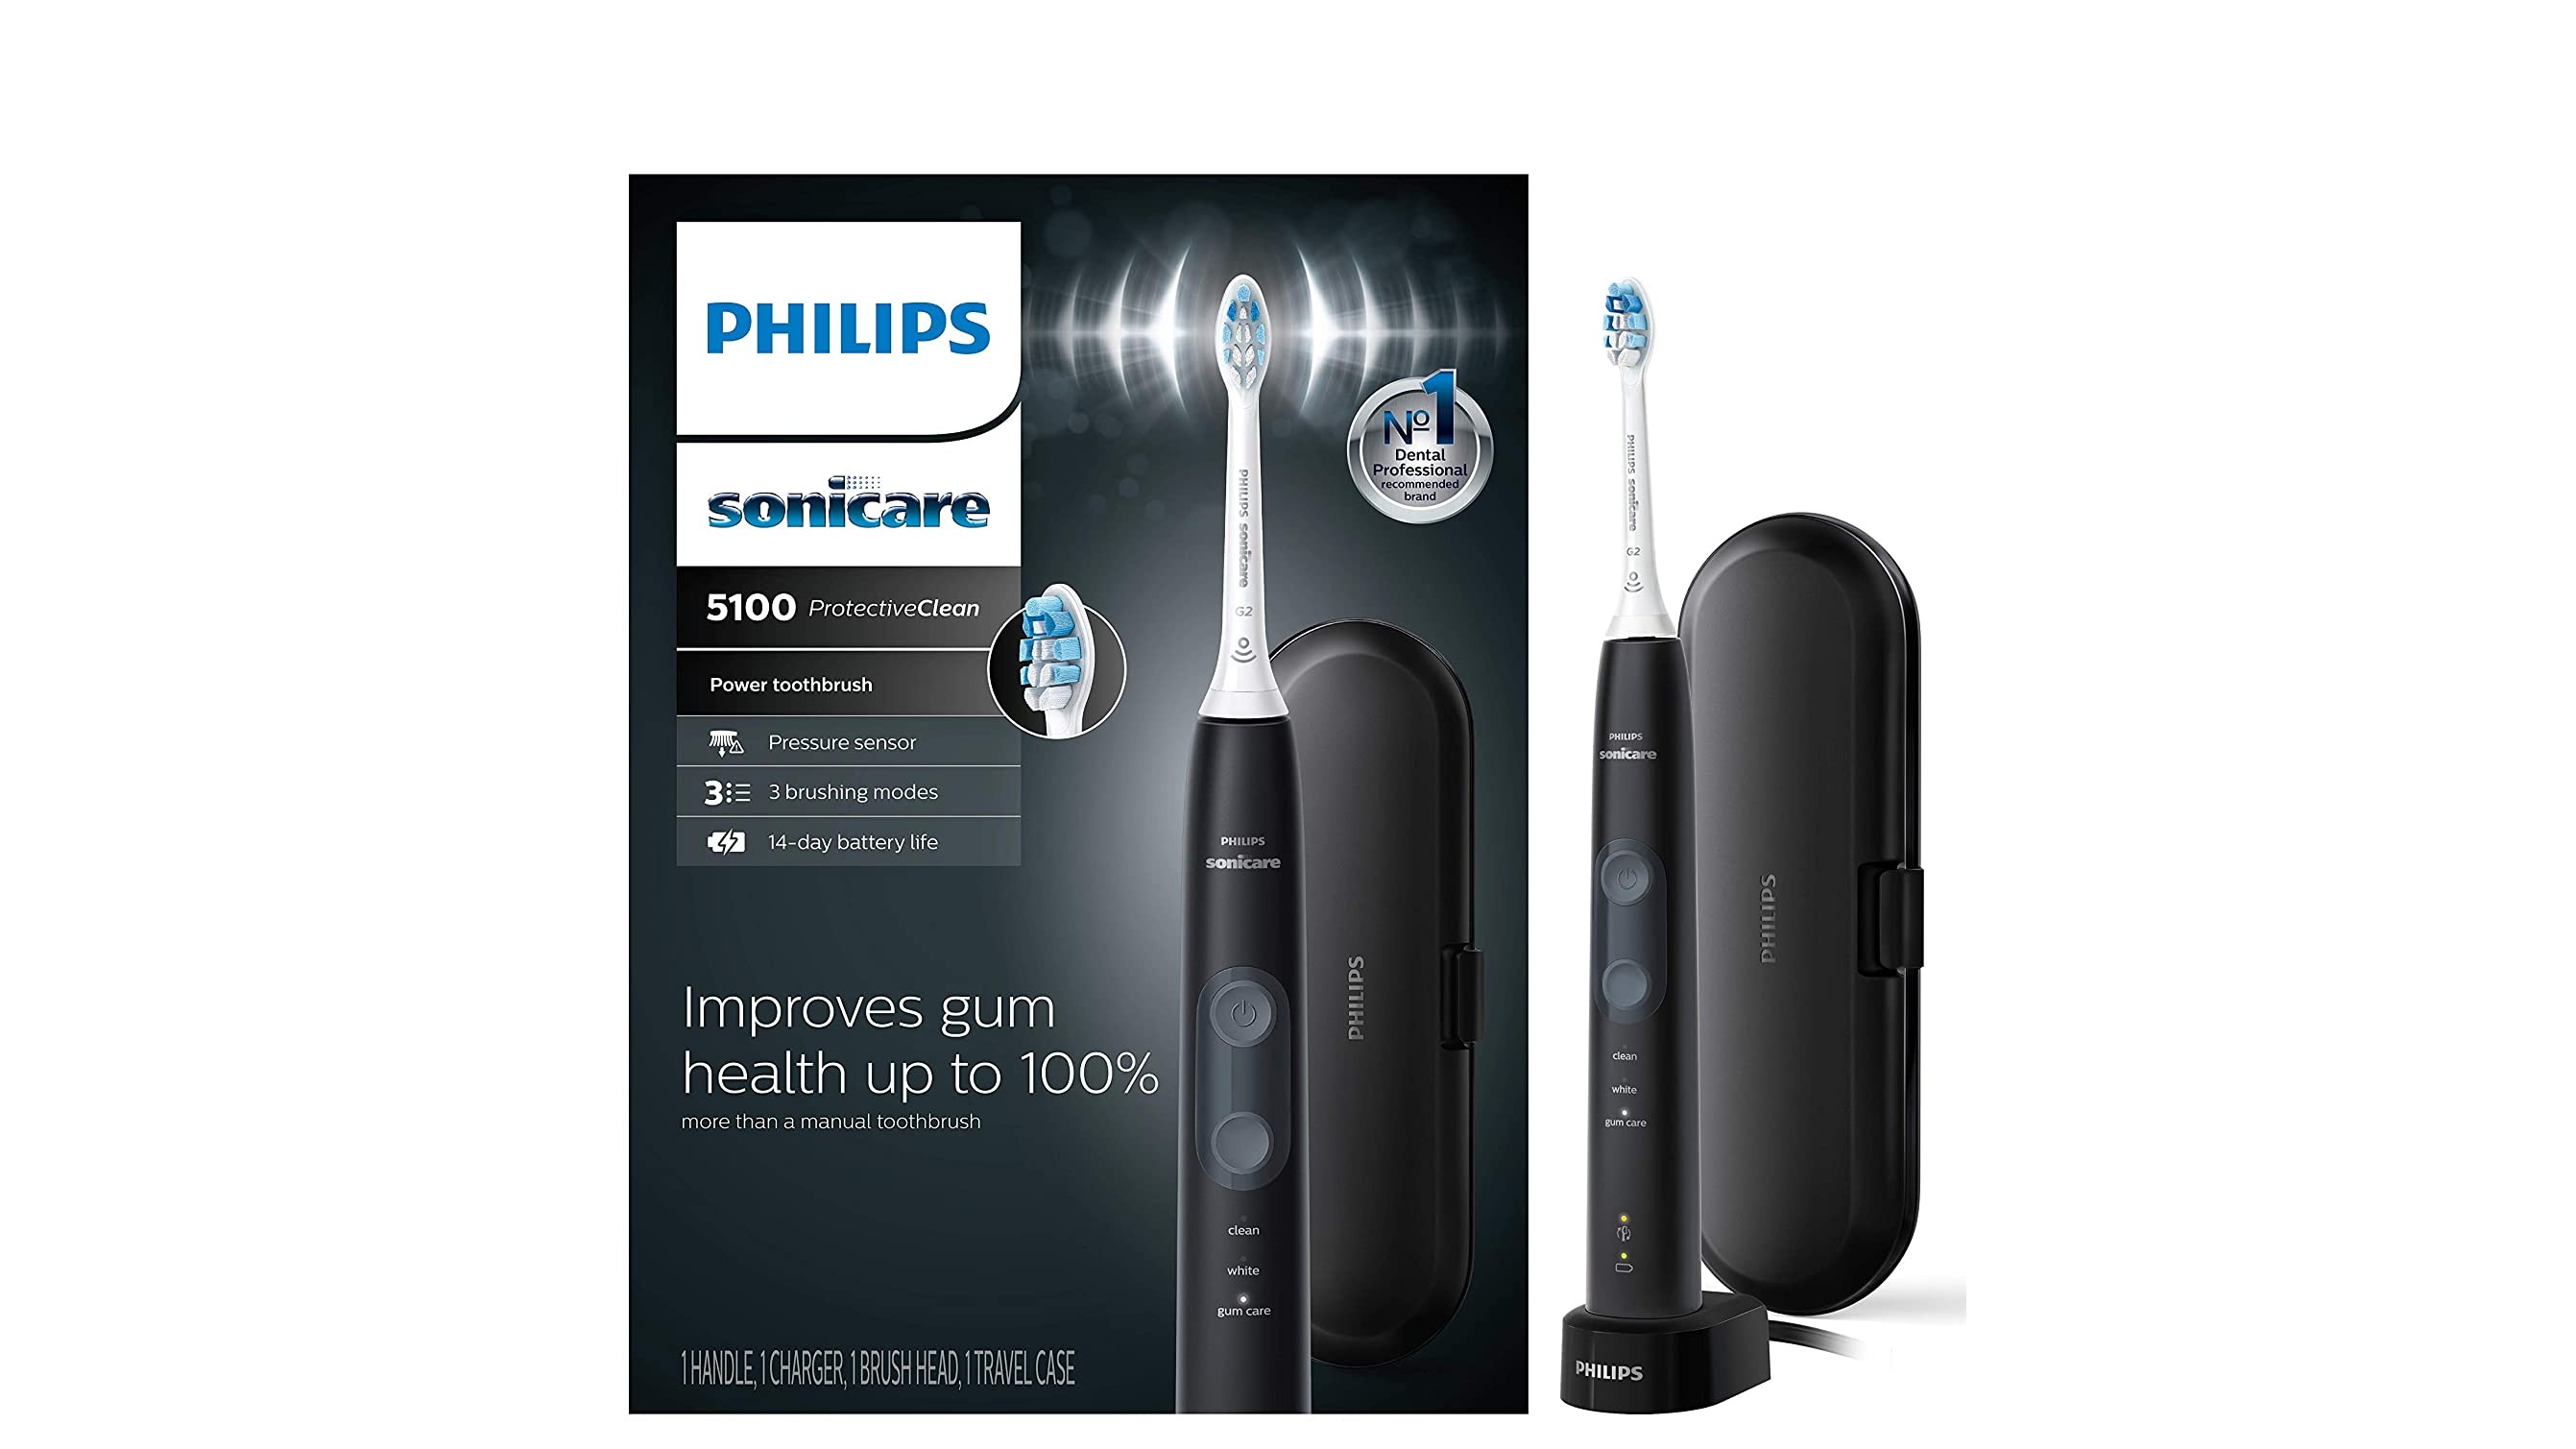 Philips Sonicare ProtectiveClean 5100 pack shot